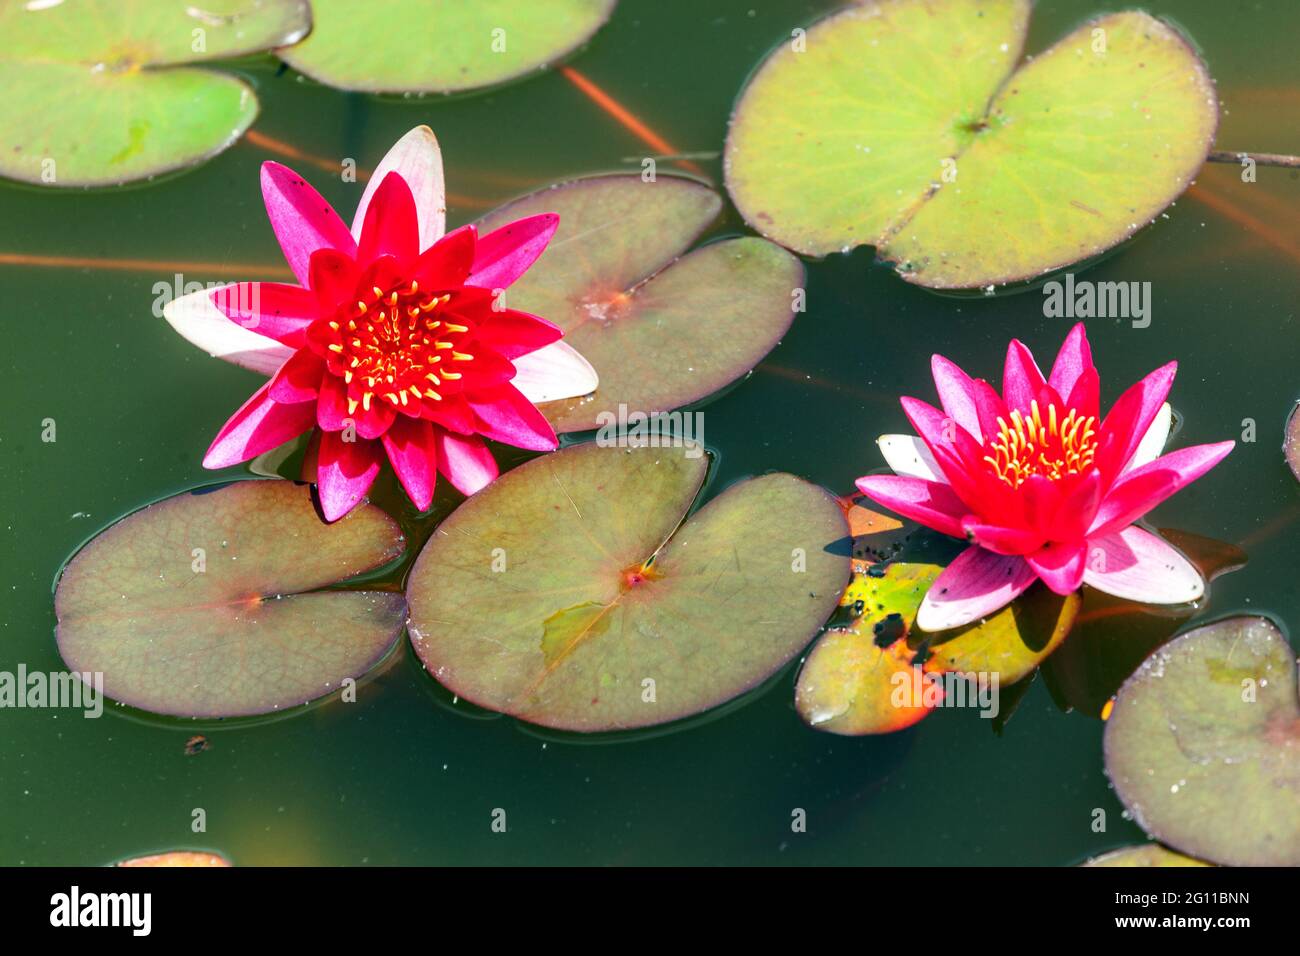 Waterlily waterlilies red flowers Water lily flower, Water lily pond garden Stock Photo